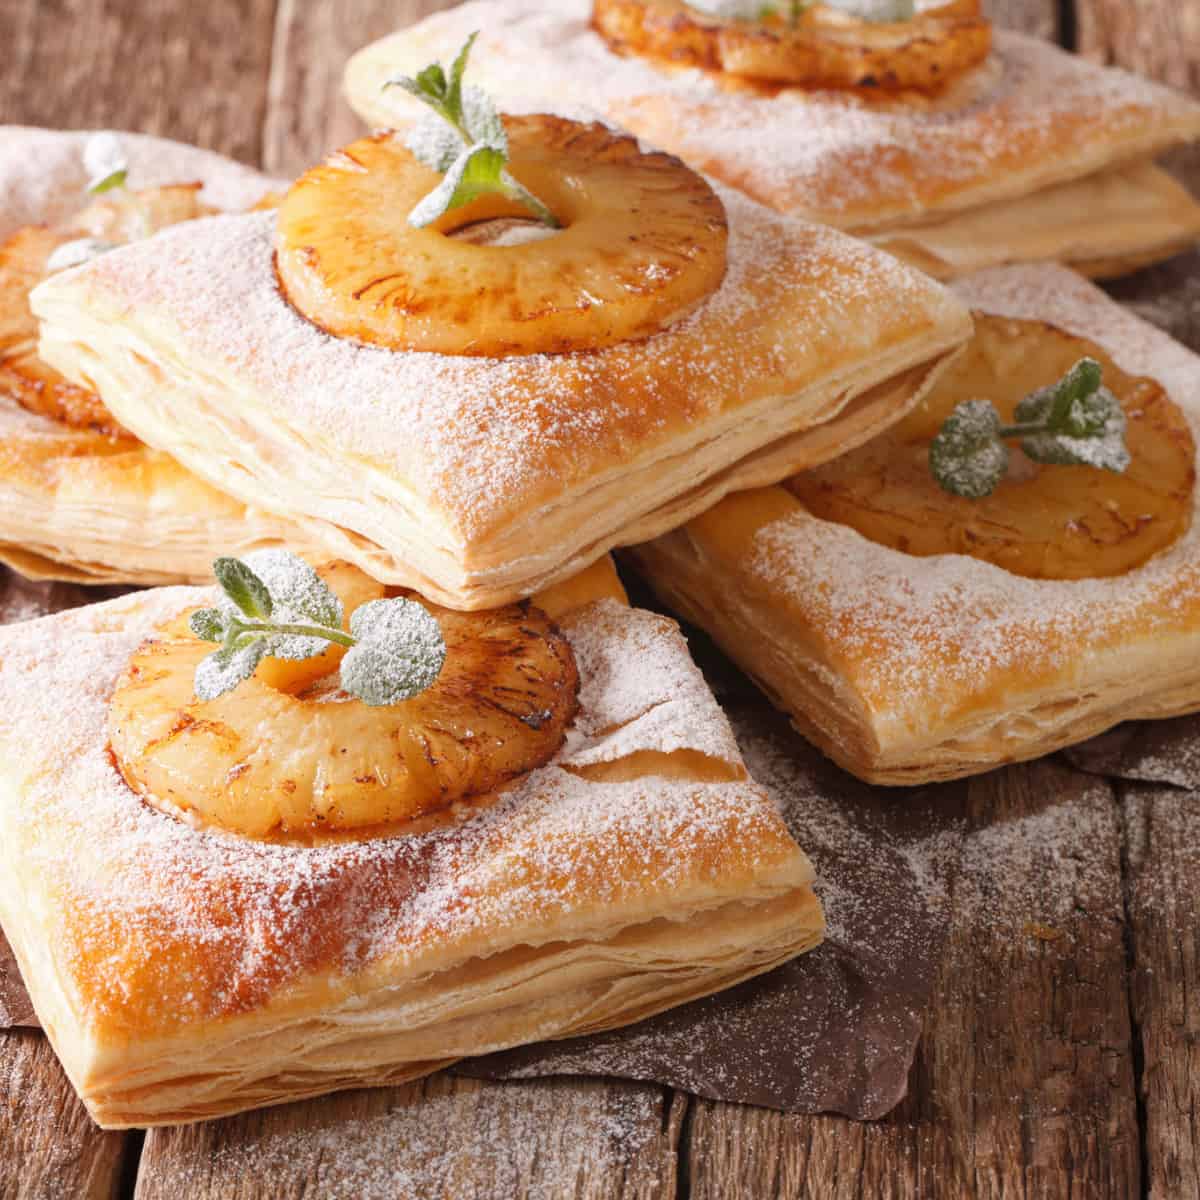 Puff pastry with a pineapple ring on top covered in powdered sugar